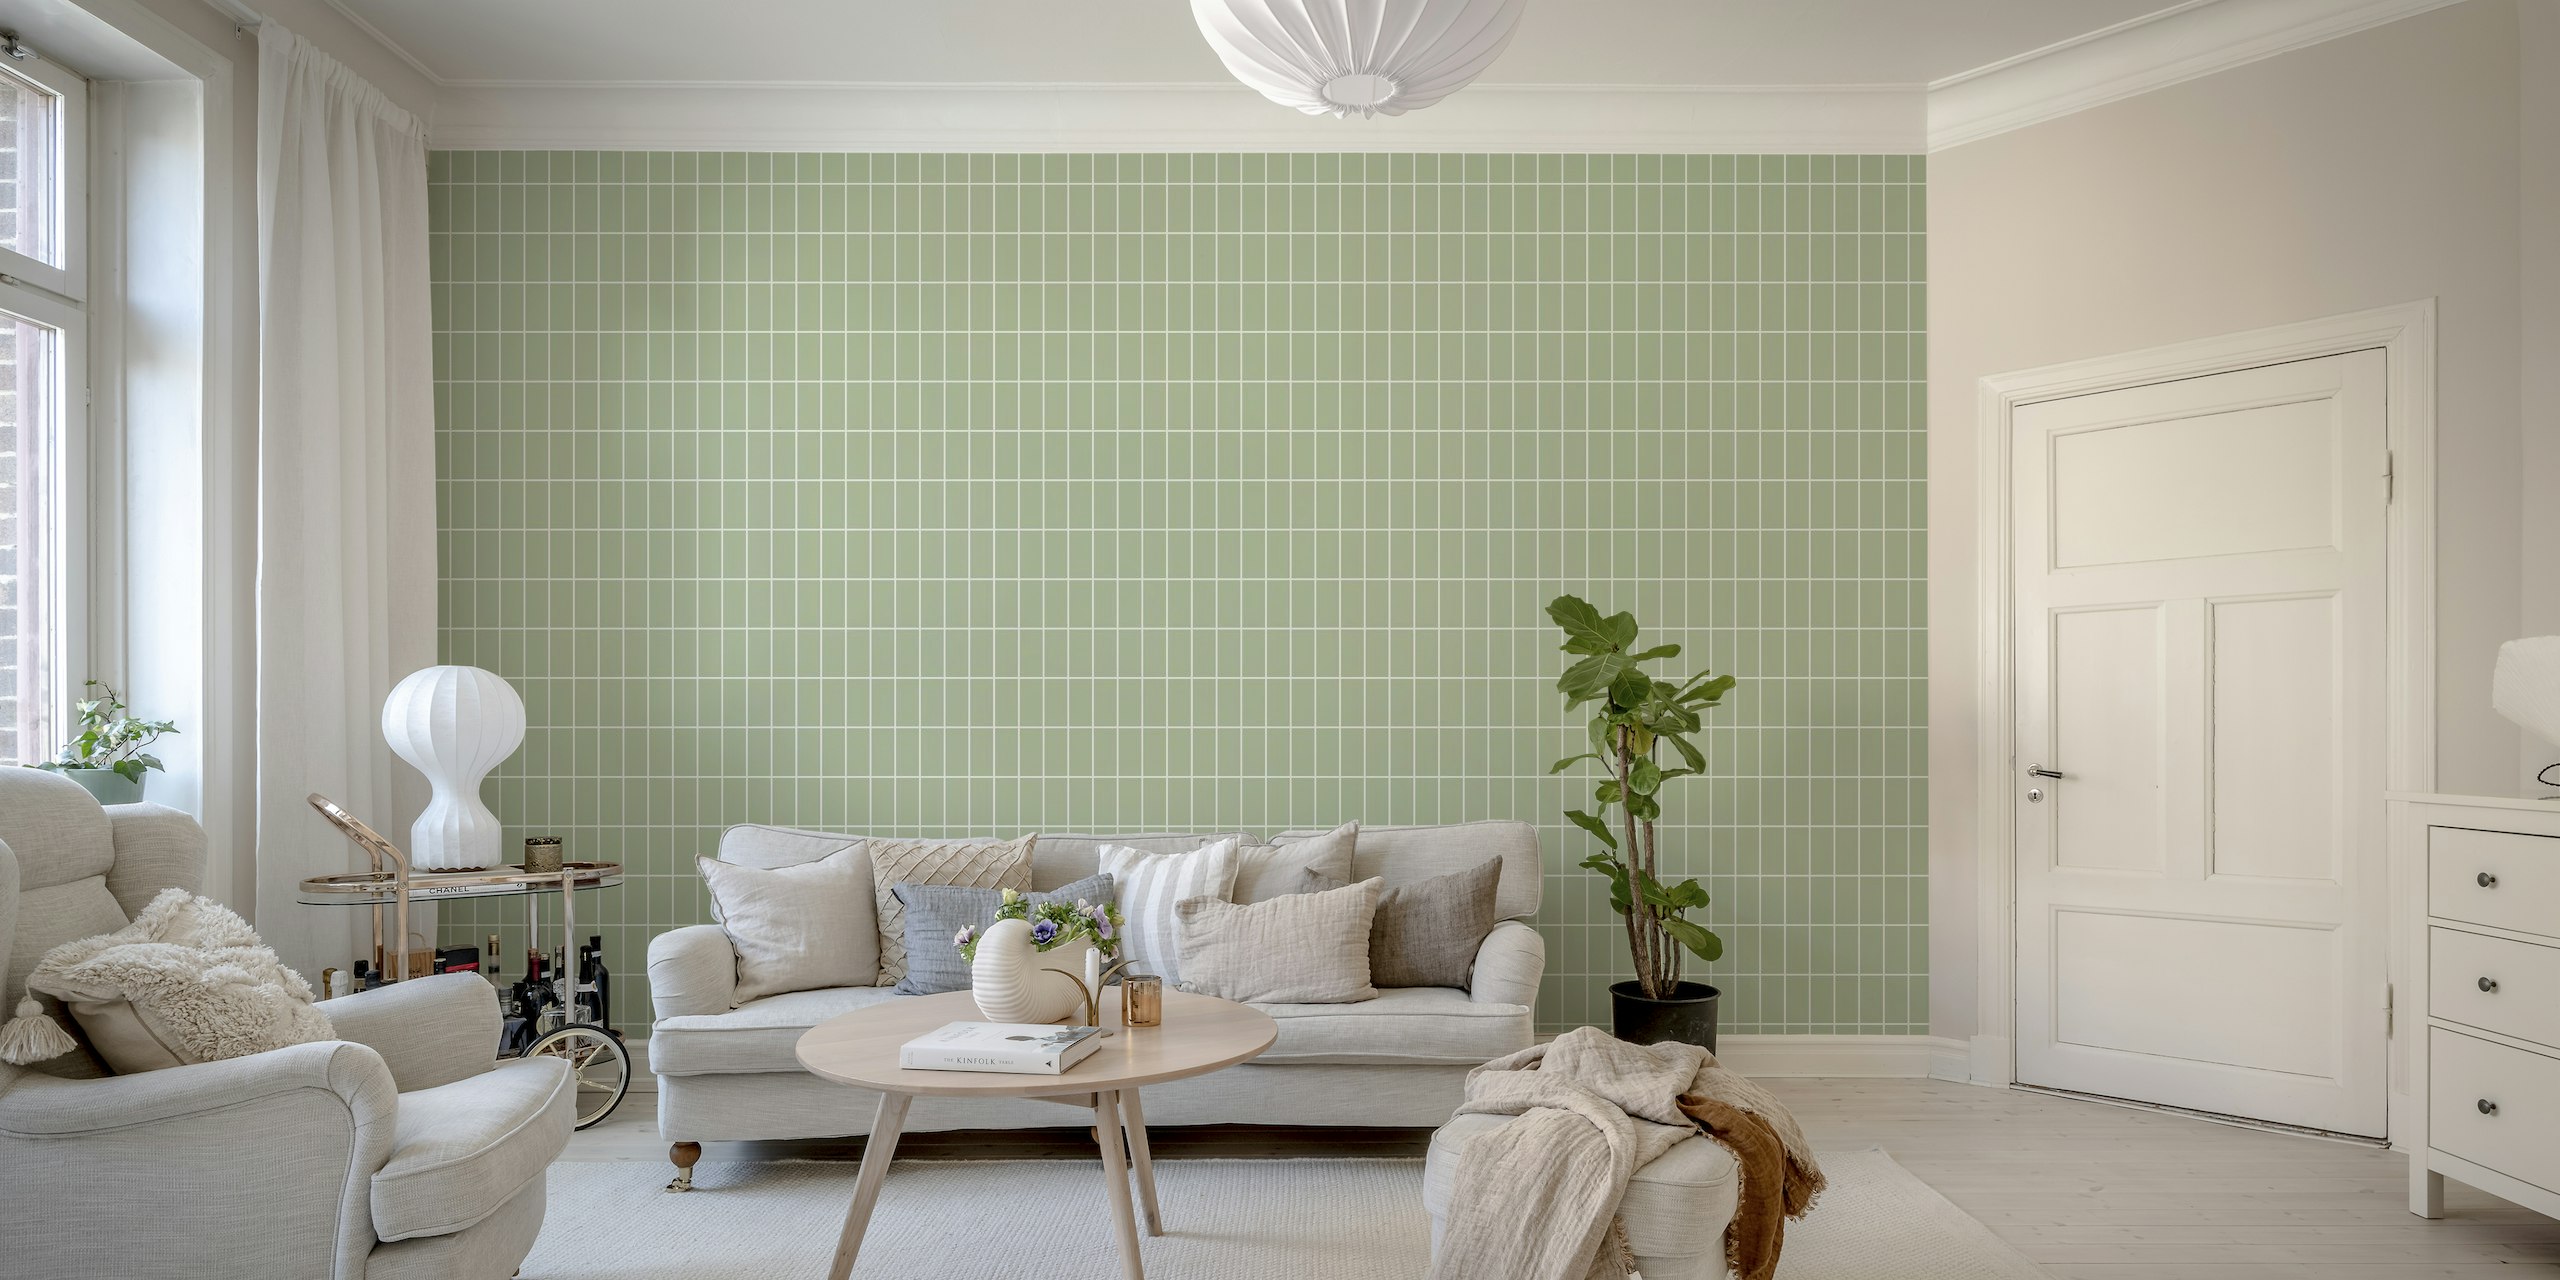 Simple Tiles - Sage and White behang